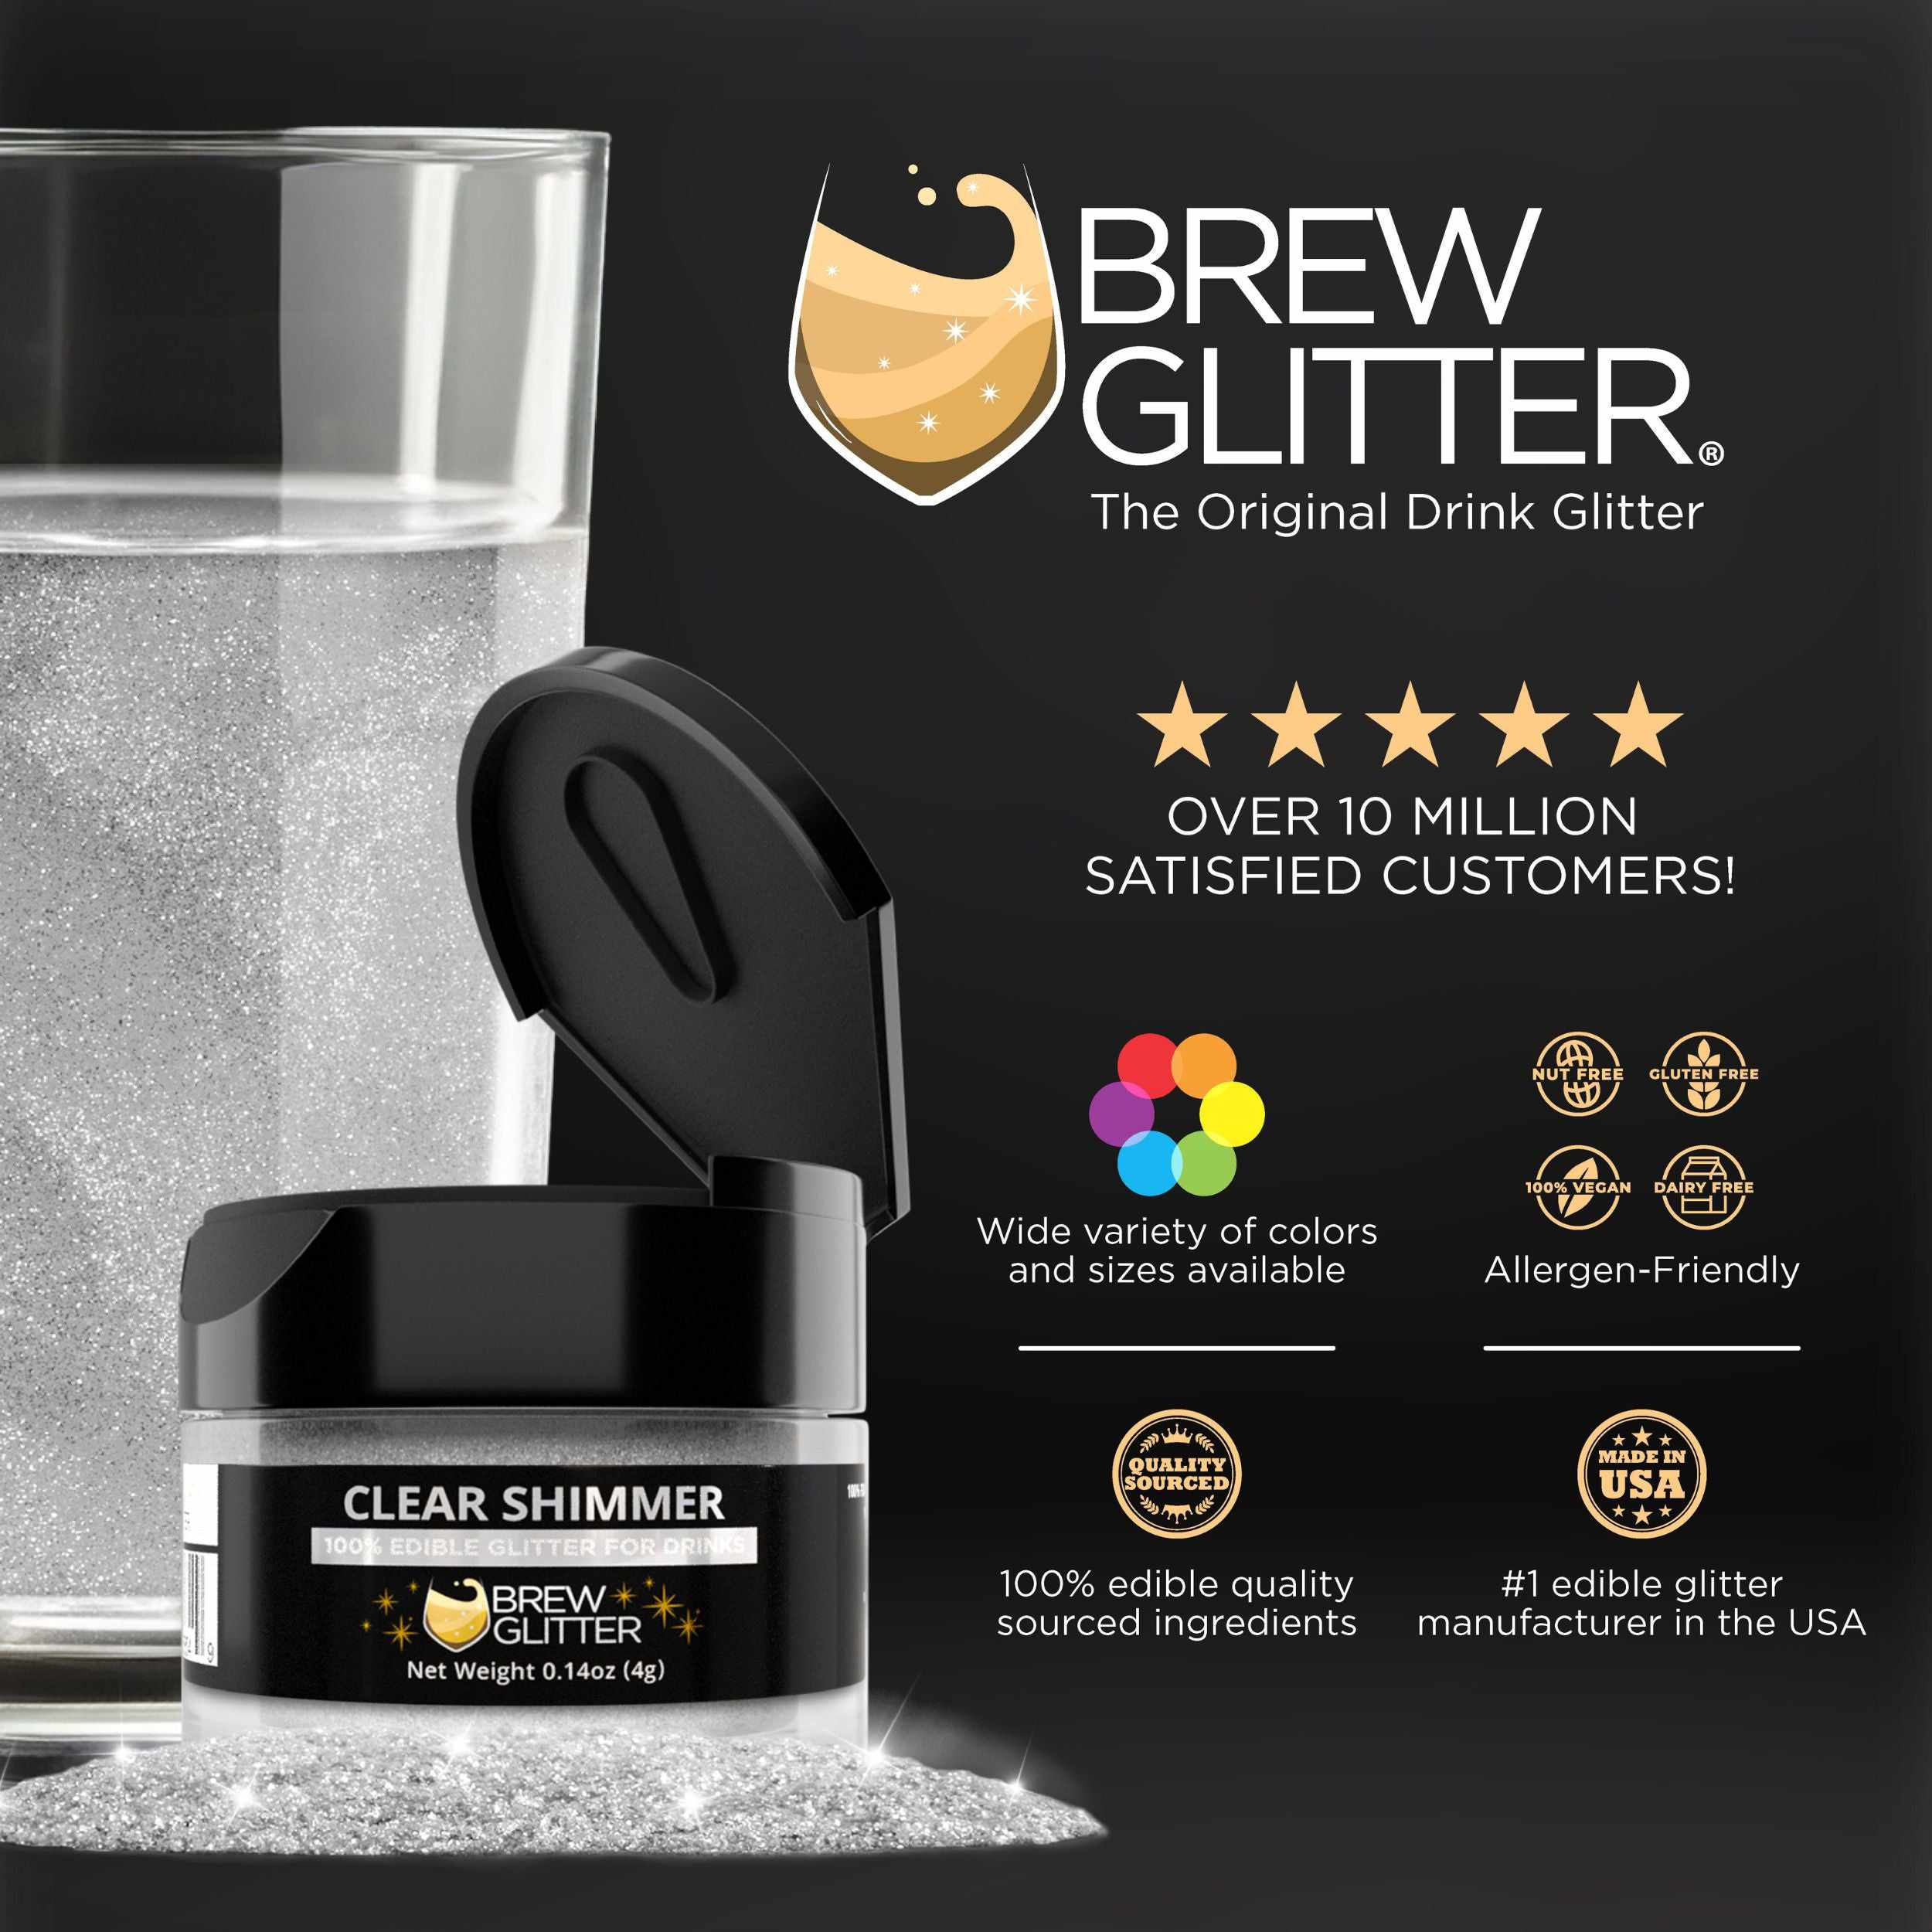 Clear Shimmer Cocktail Glitter | Edible Glitter for Cocktails Drinks!